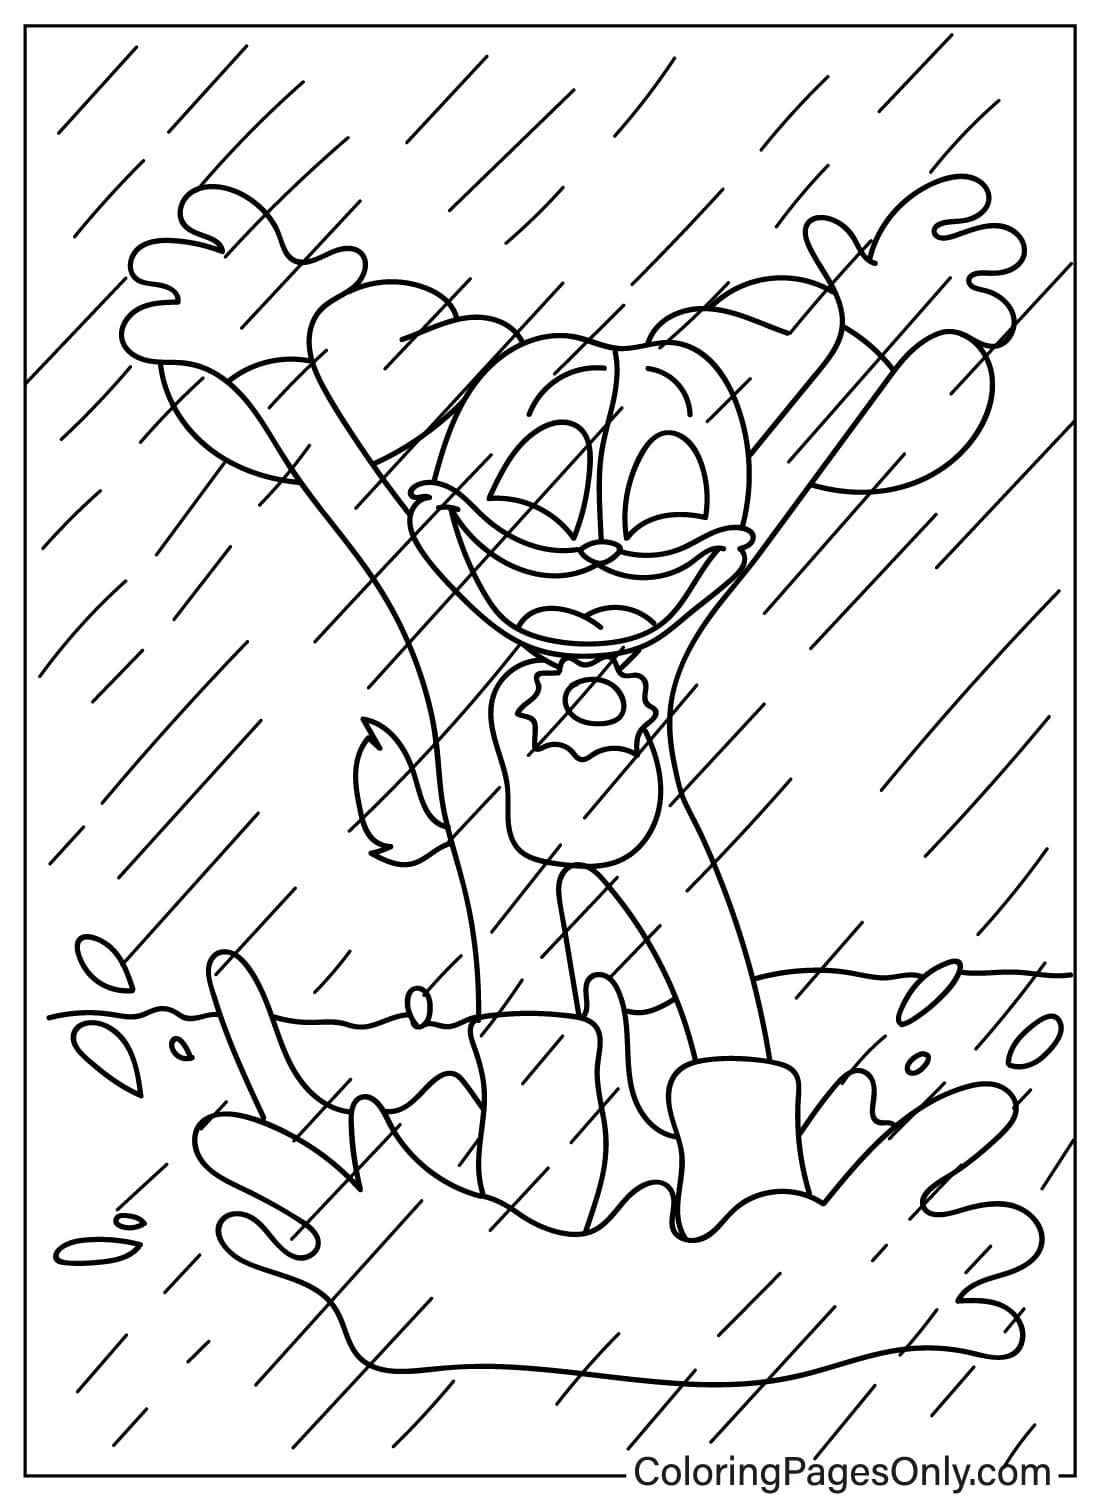 Free DogDay Coloring Page from DogDay